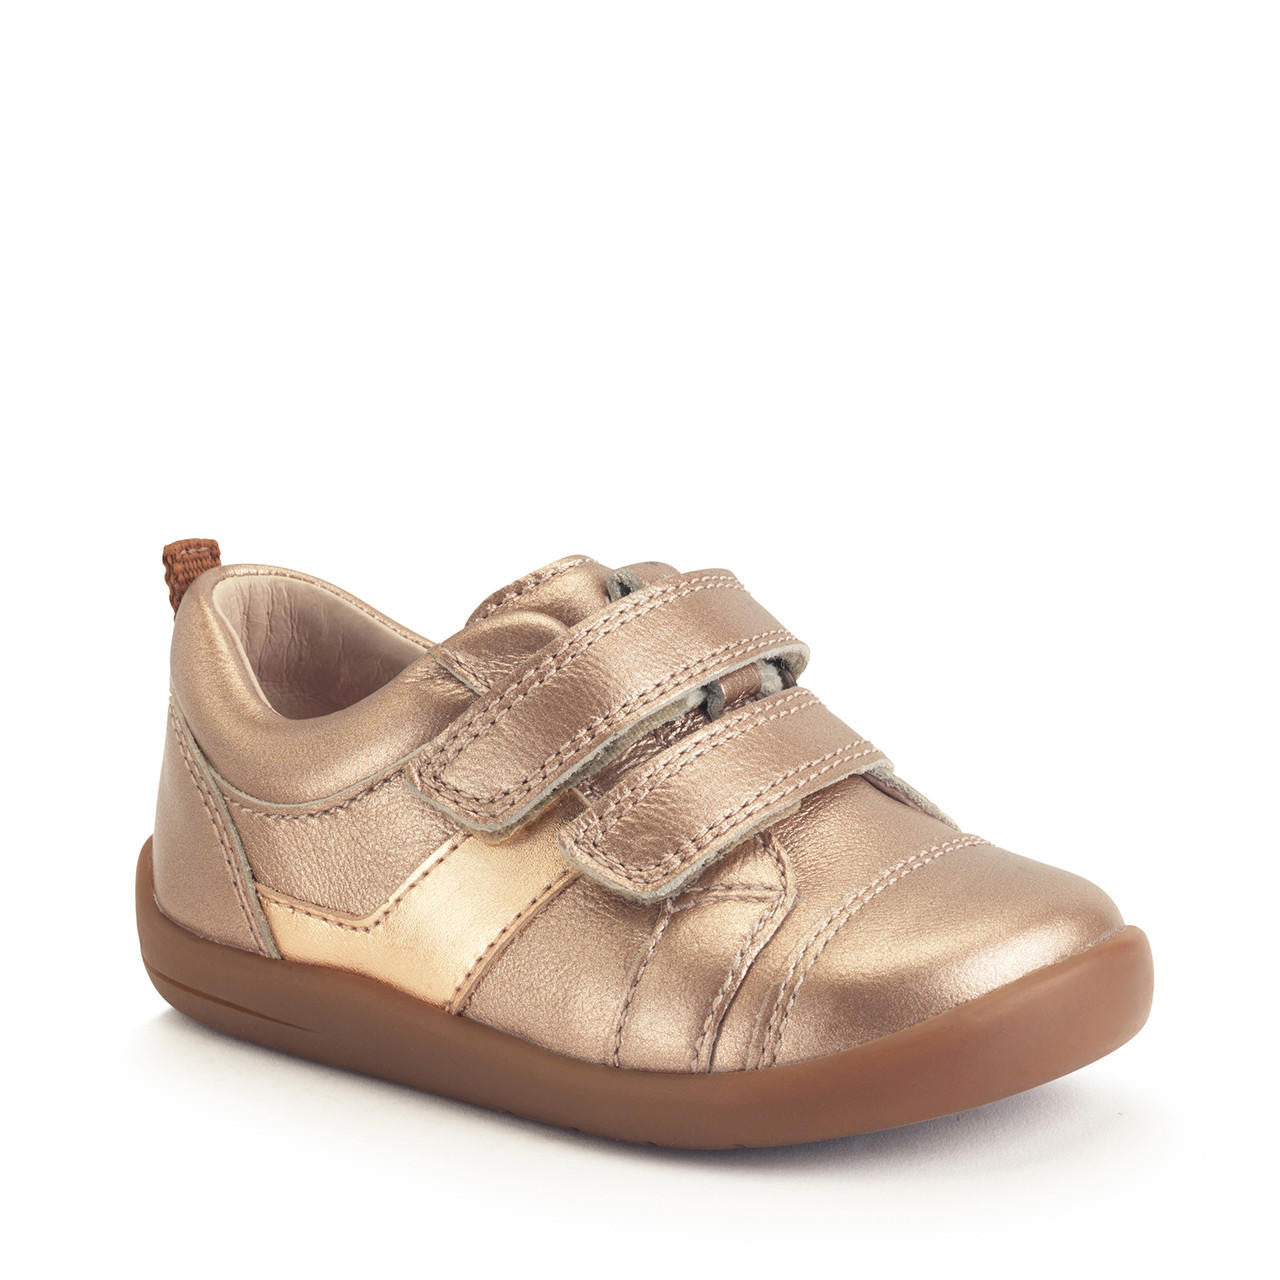 A girls casual shoe by Start-Rite, style Maze, in rose gold leather. Double velcro fastening. Angled right side view.